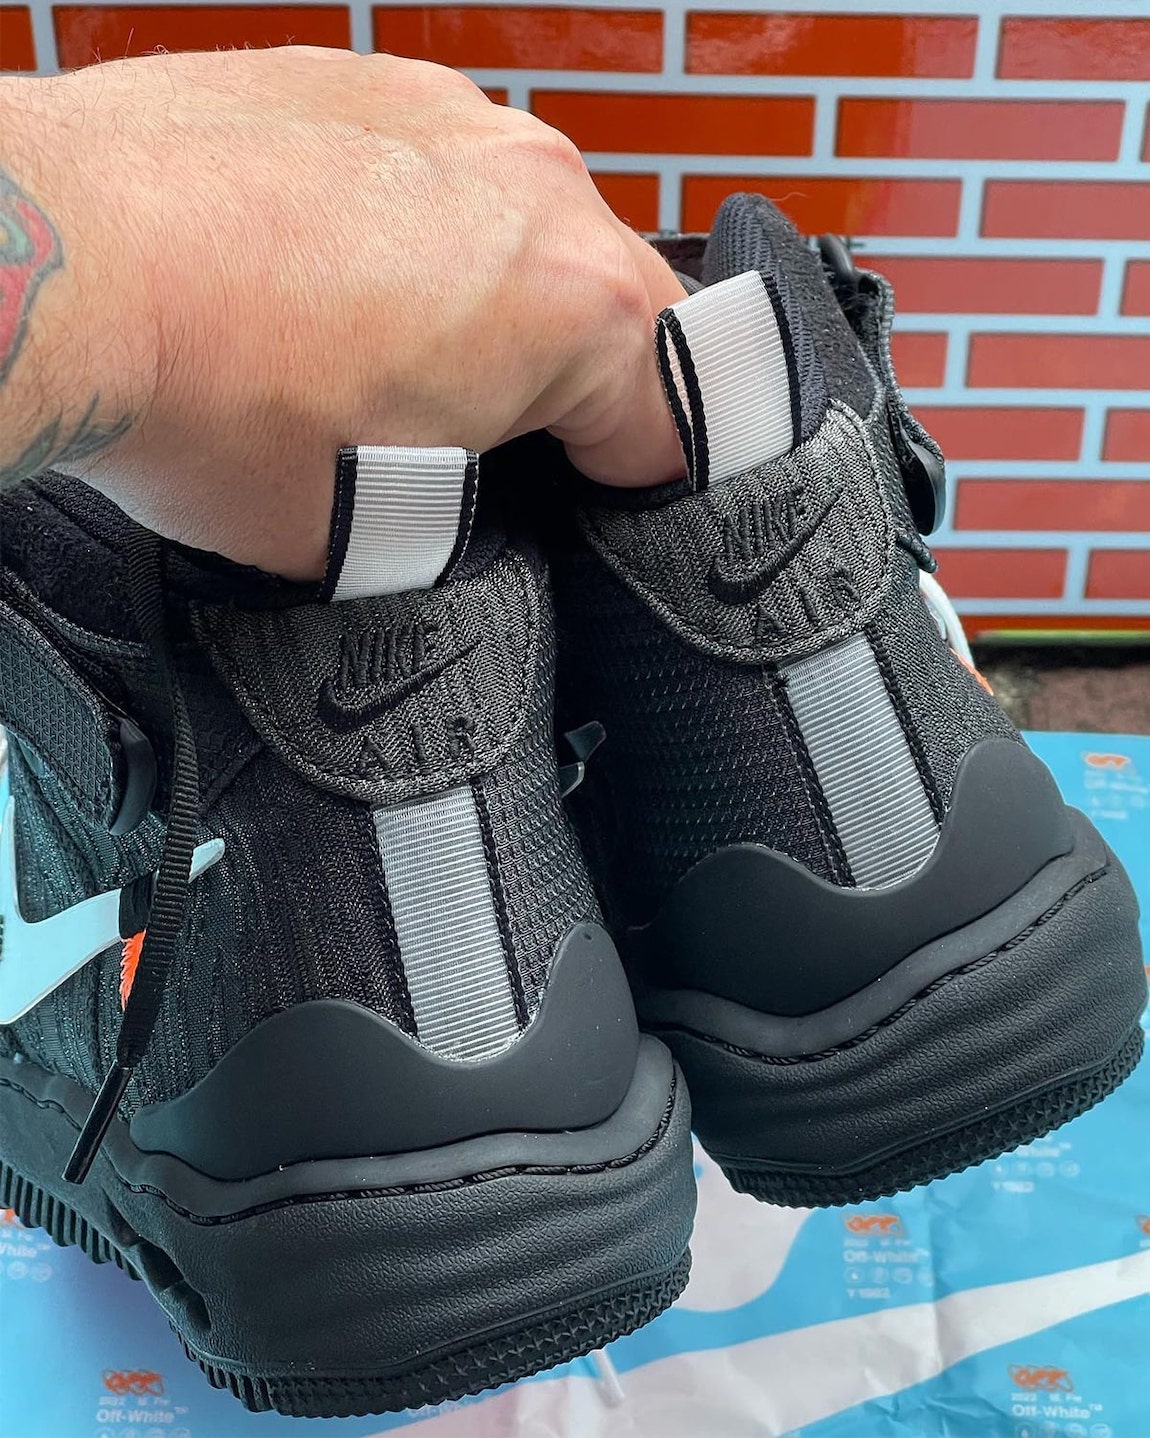 Off-White x Nike Air Force 1 Mid SP Black: Review & On-Feet